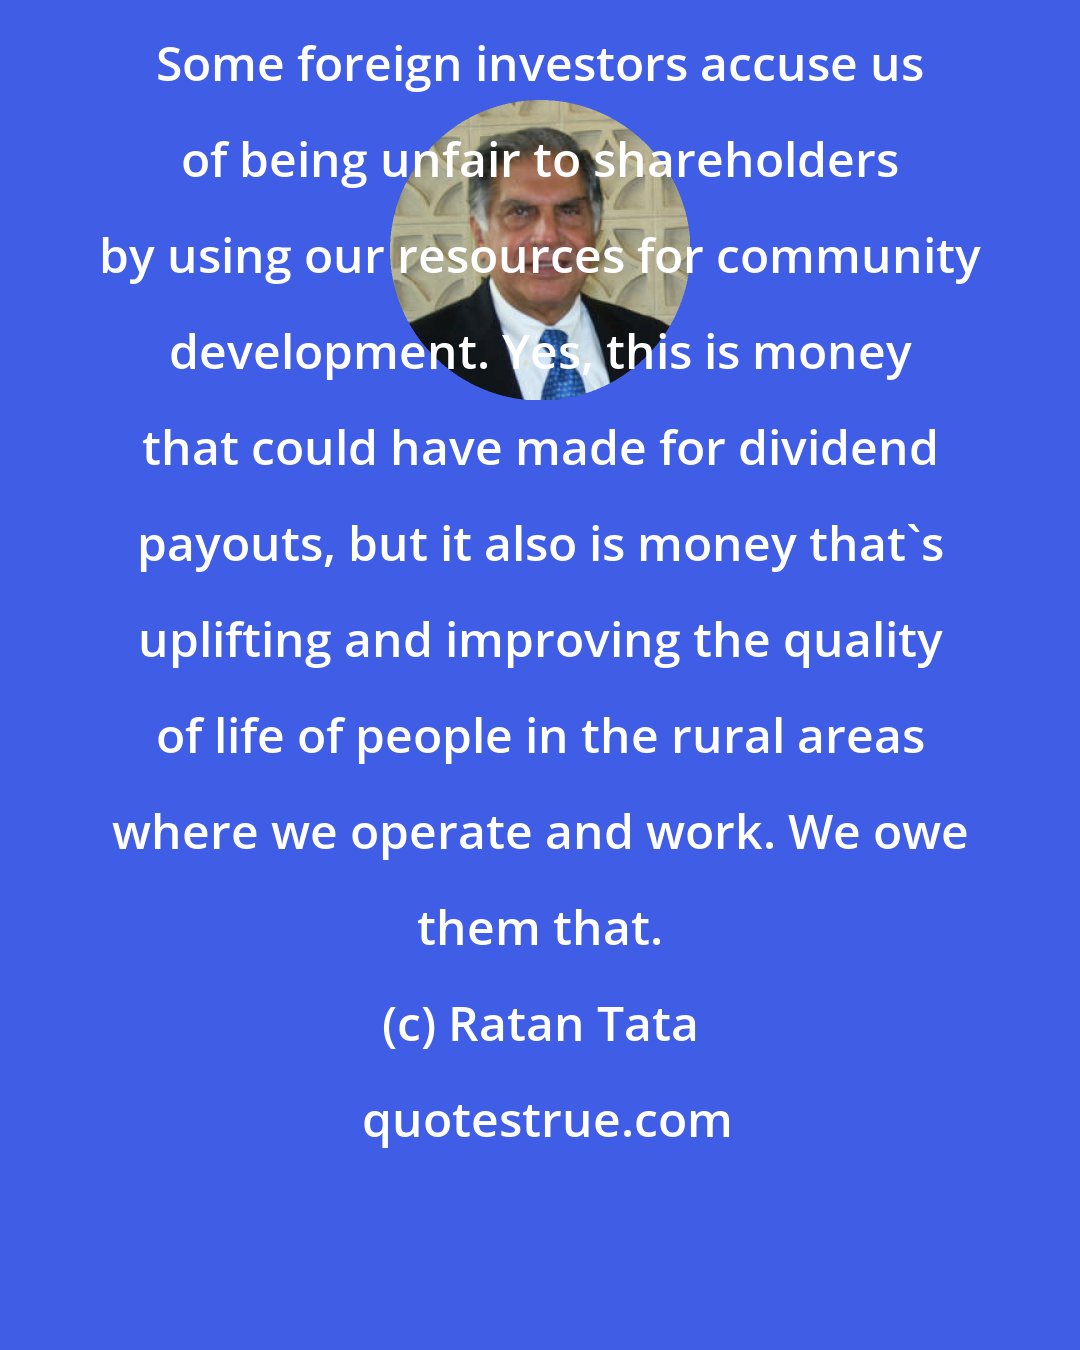 Ratan Tata: Some foreign investors accuse us of being unfair to shareholders by using our resources for community development. Yes, this is money that could have made for dividend payouts, but it also is money that's uplifting and improving the quality of life of people in the rural areas where we operate and work. We owe them that.